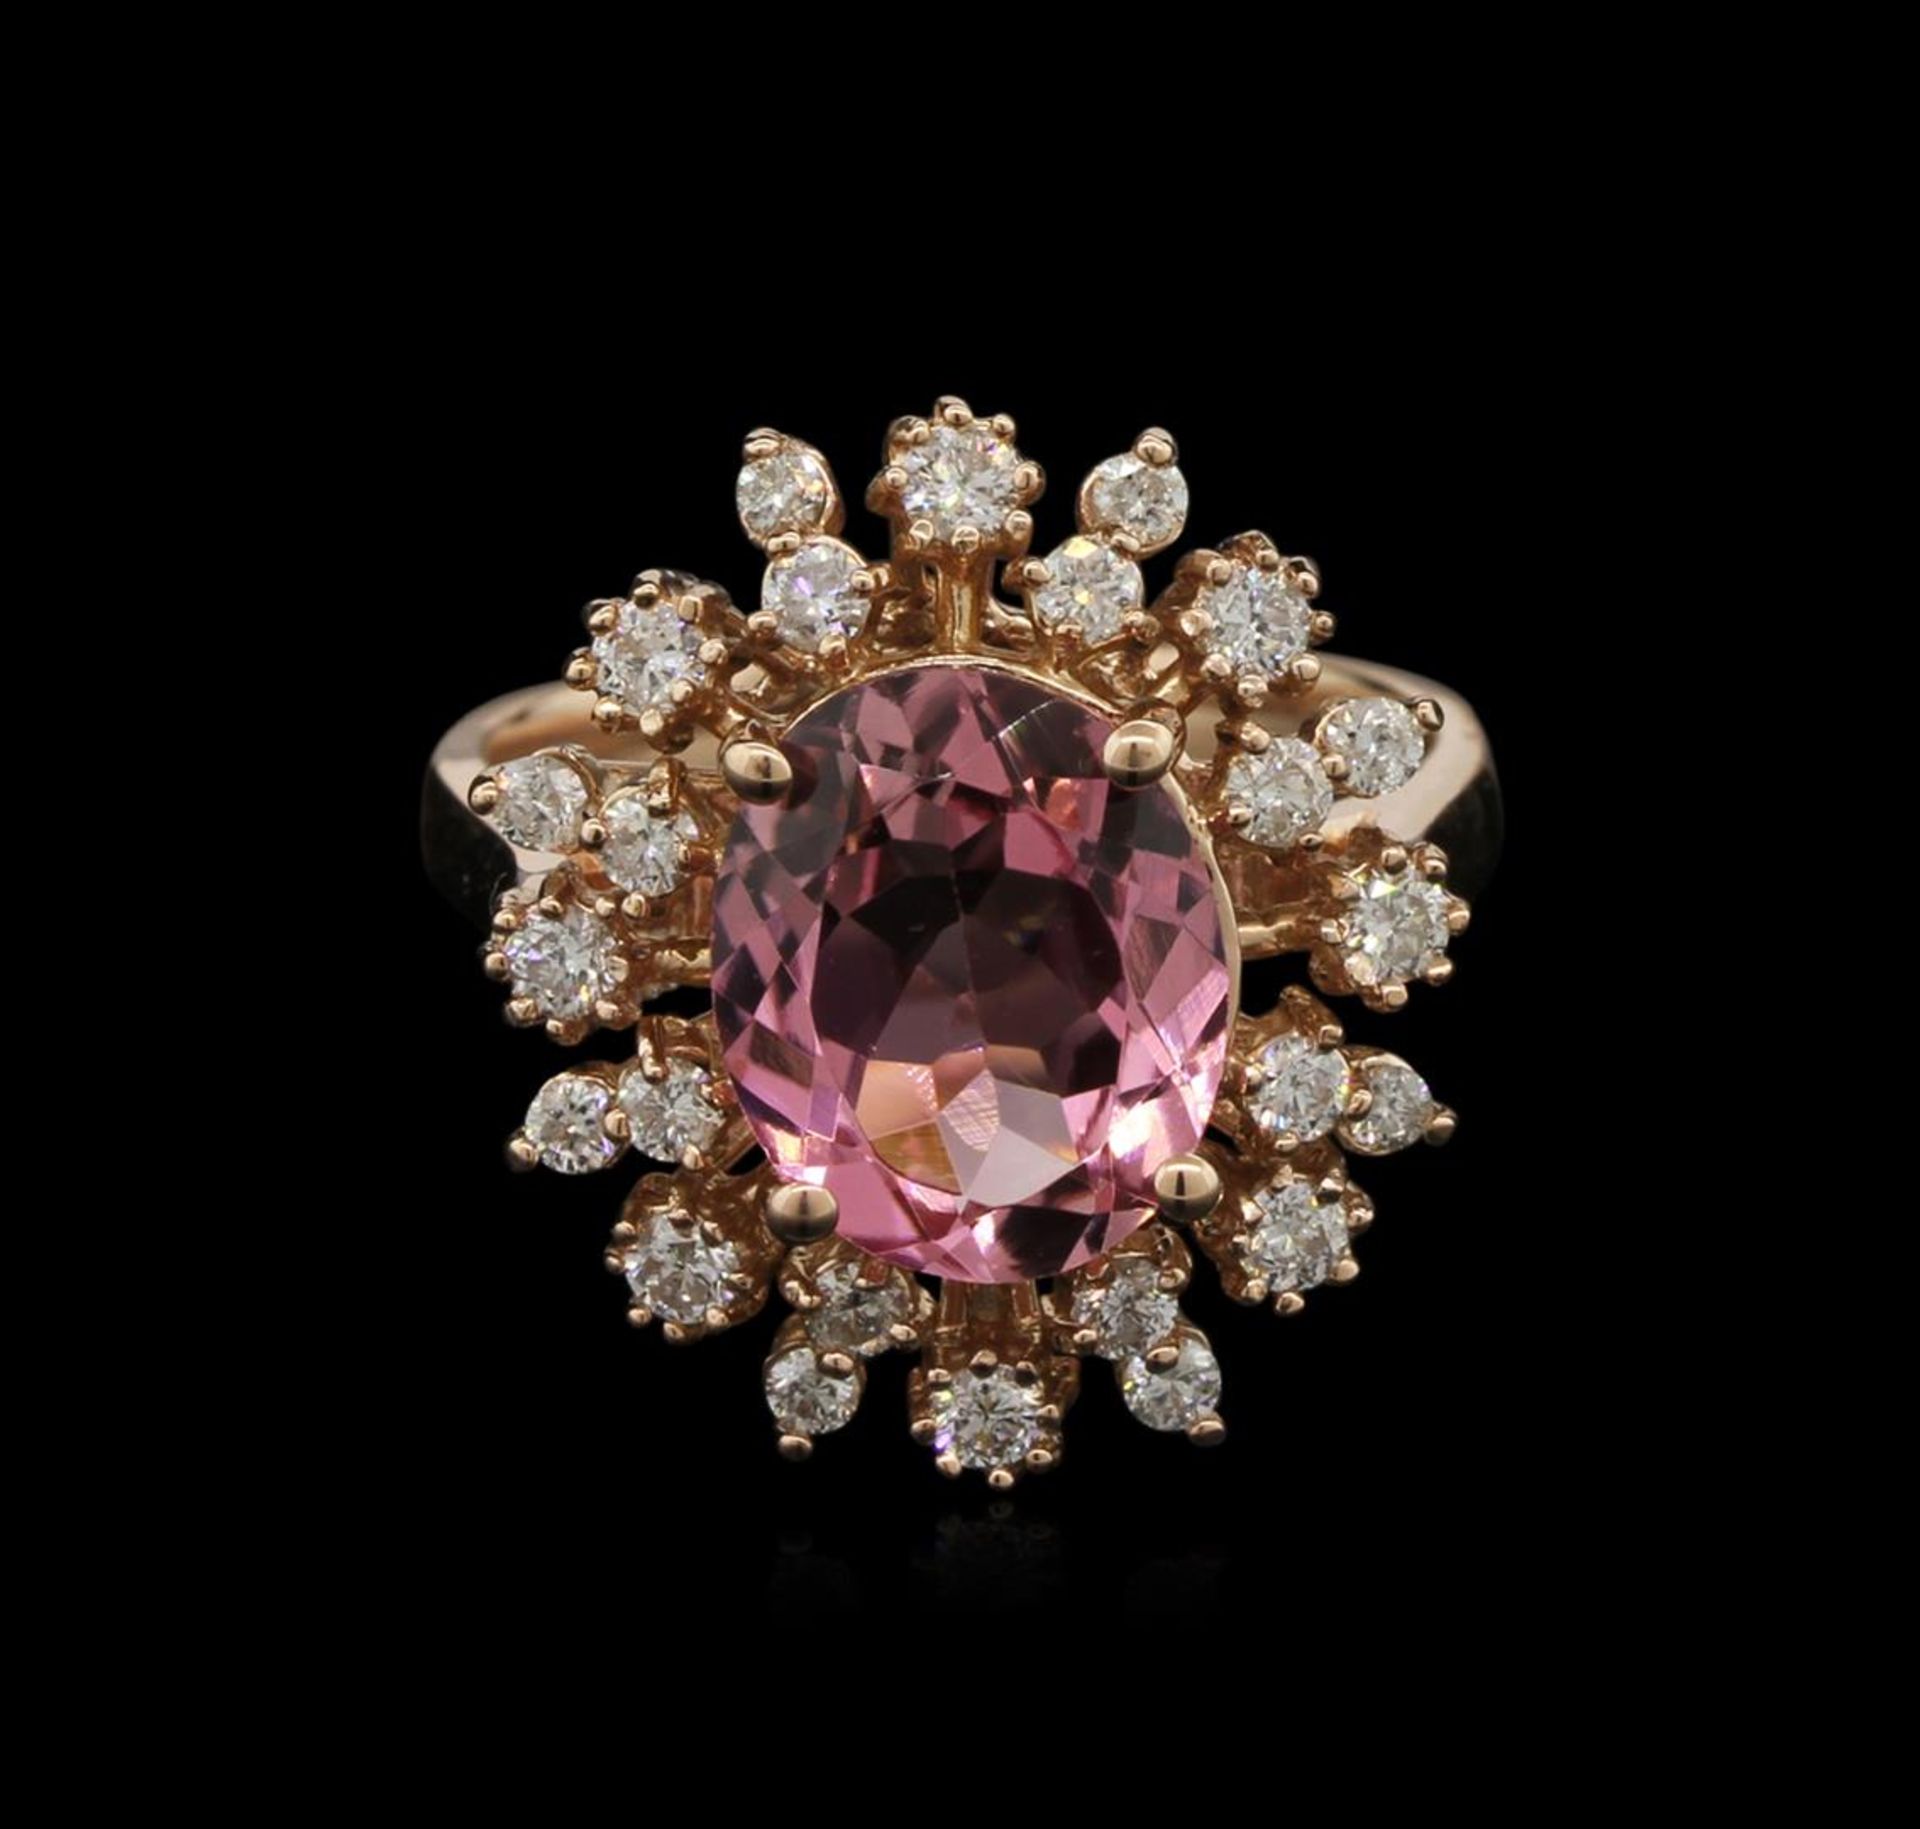 3.06 ctw Pink Tourmaline and Diamond Ring - 14KT Rose Gold - Image 2 of 3